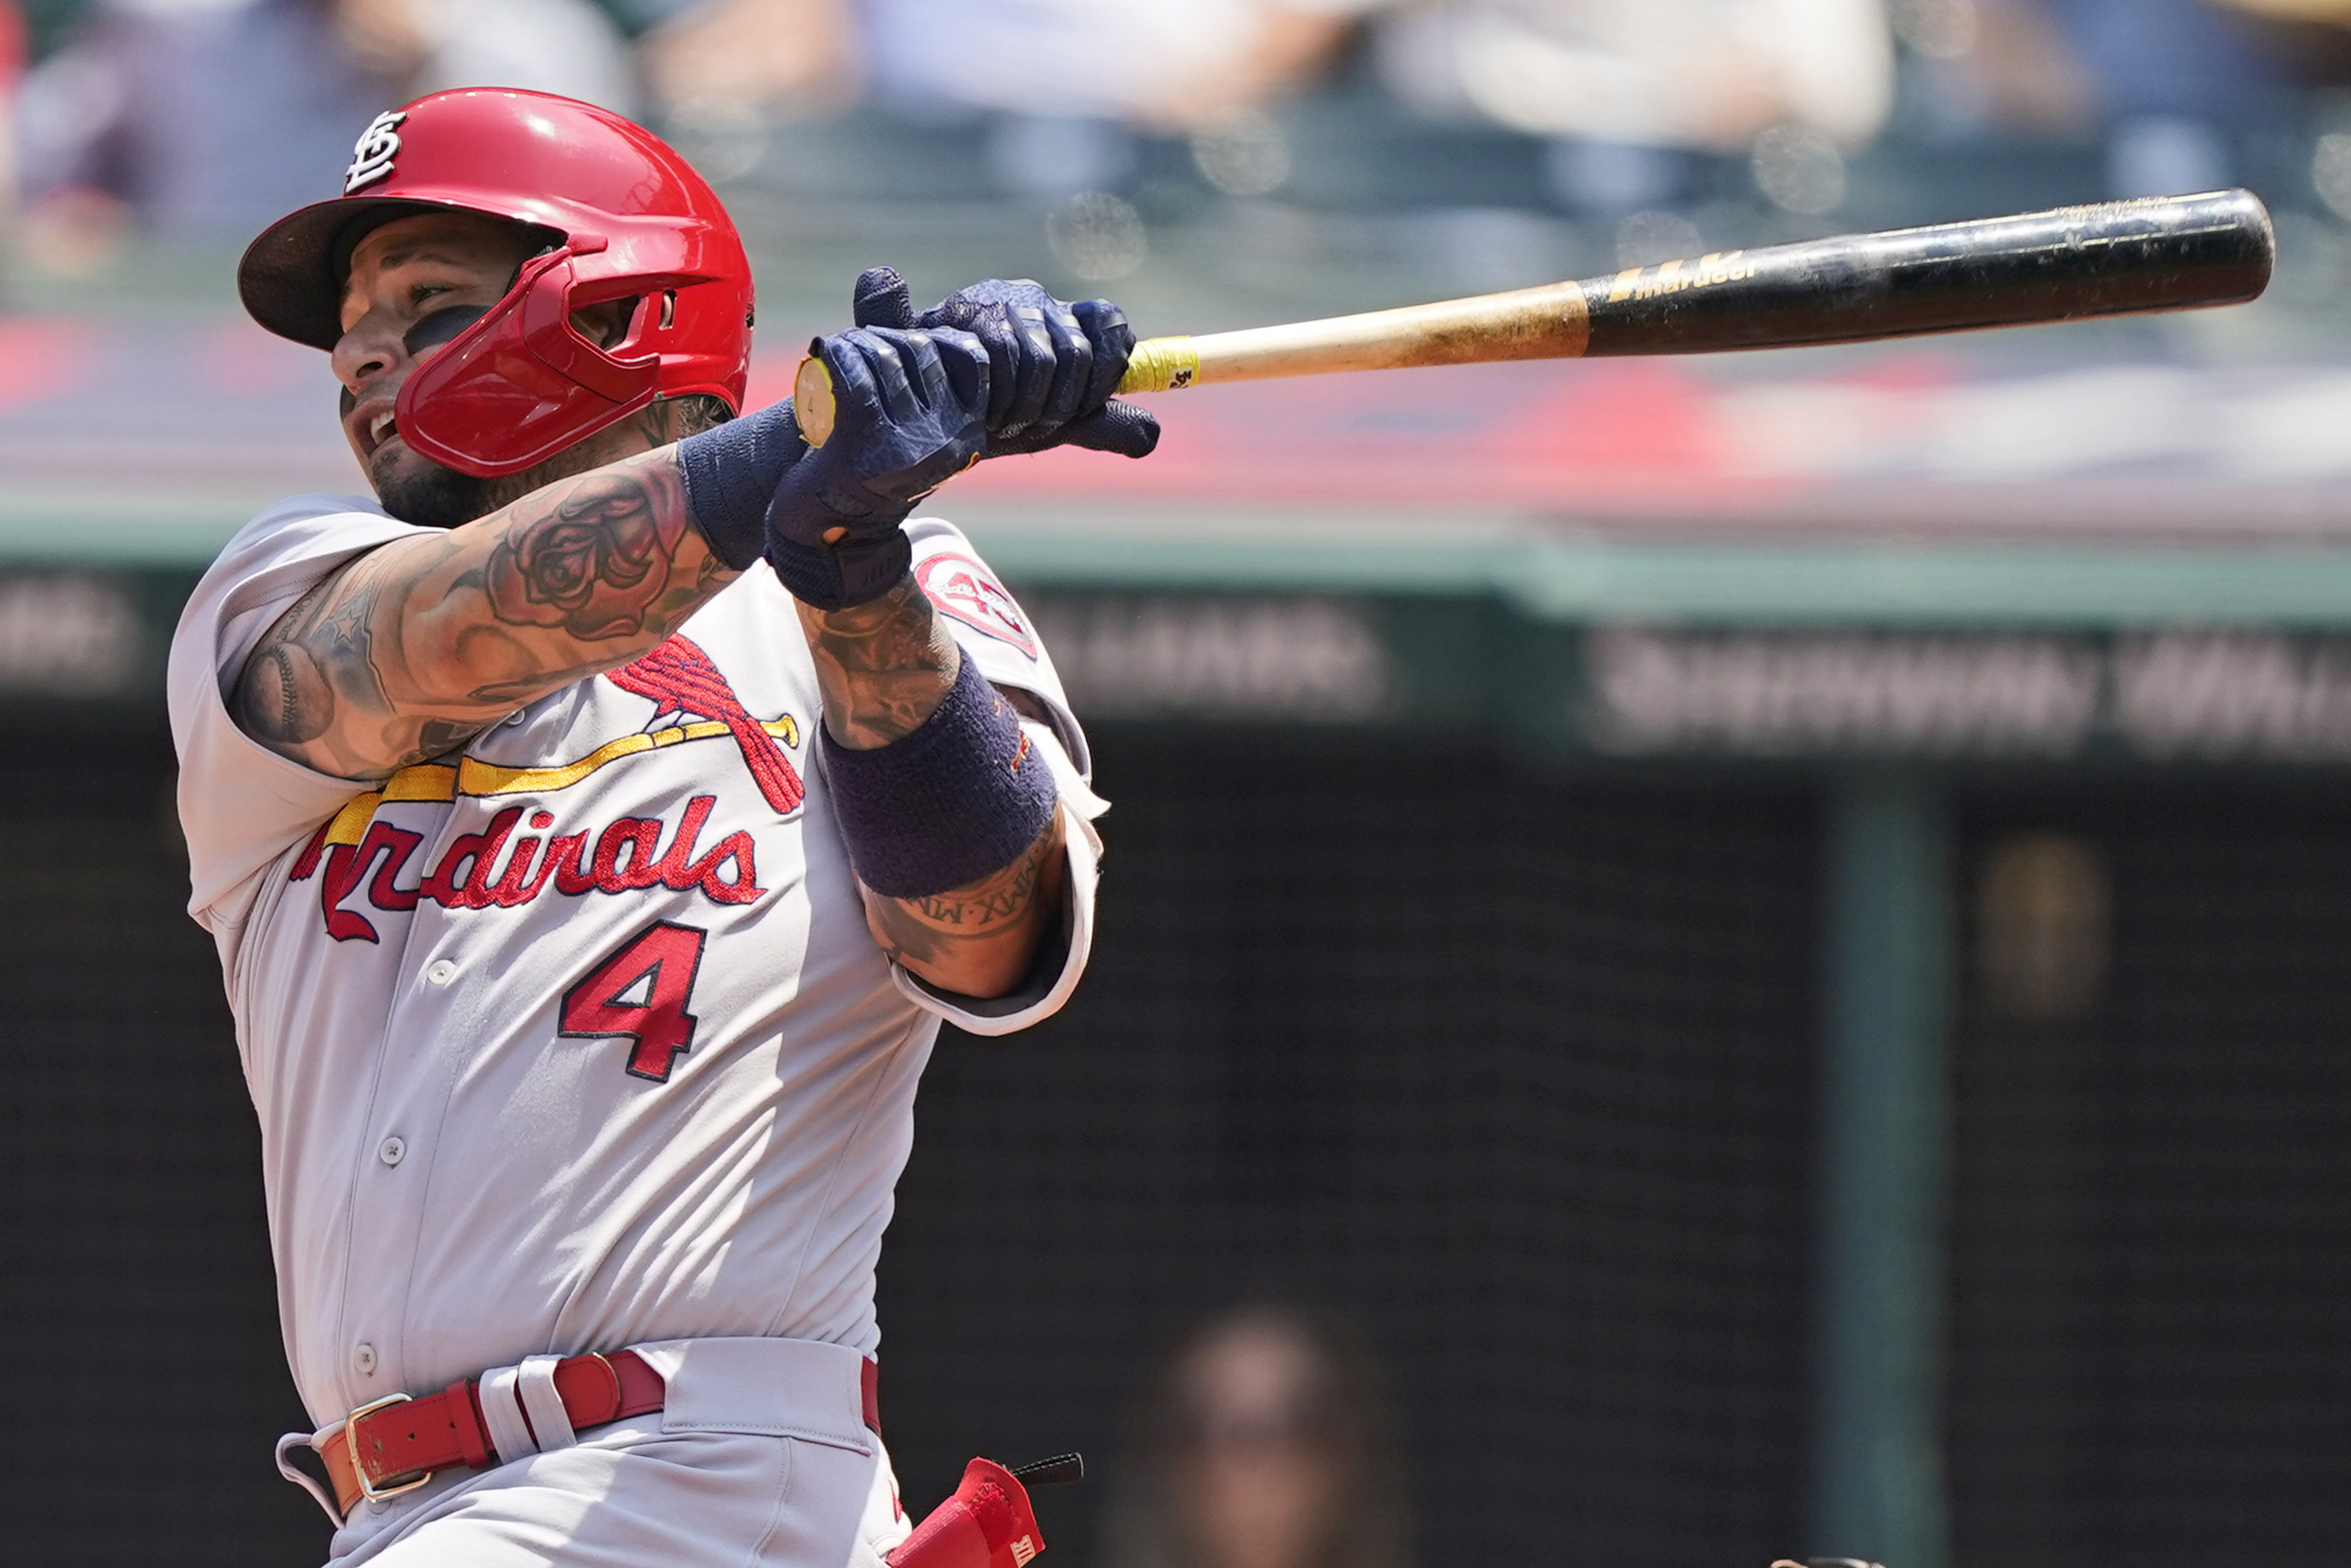 YADIER MOLINA AGREES TO 2021 CONTRACT; PREMIER FRANCHISE PLAYER